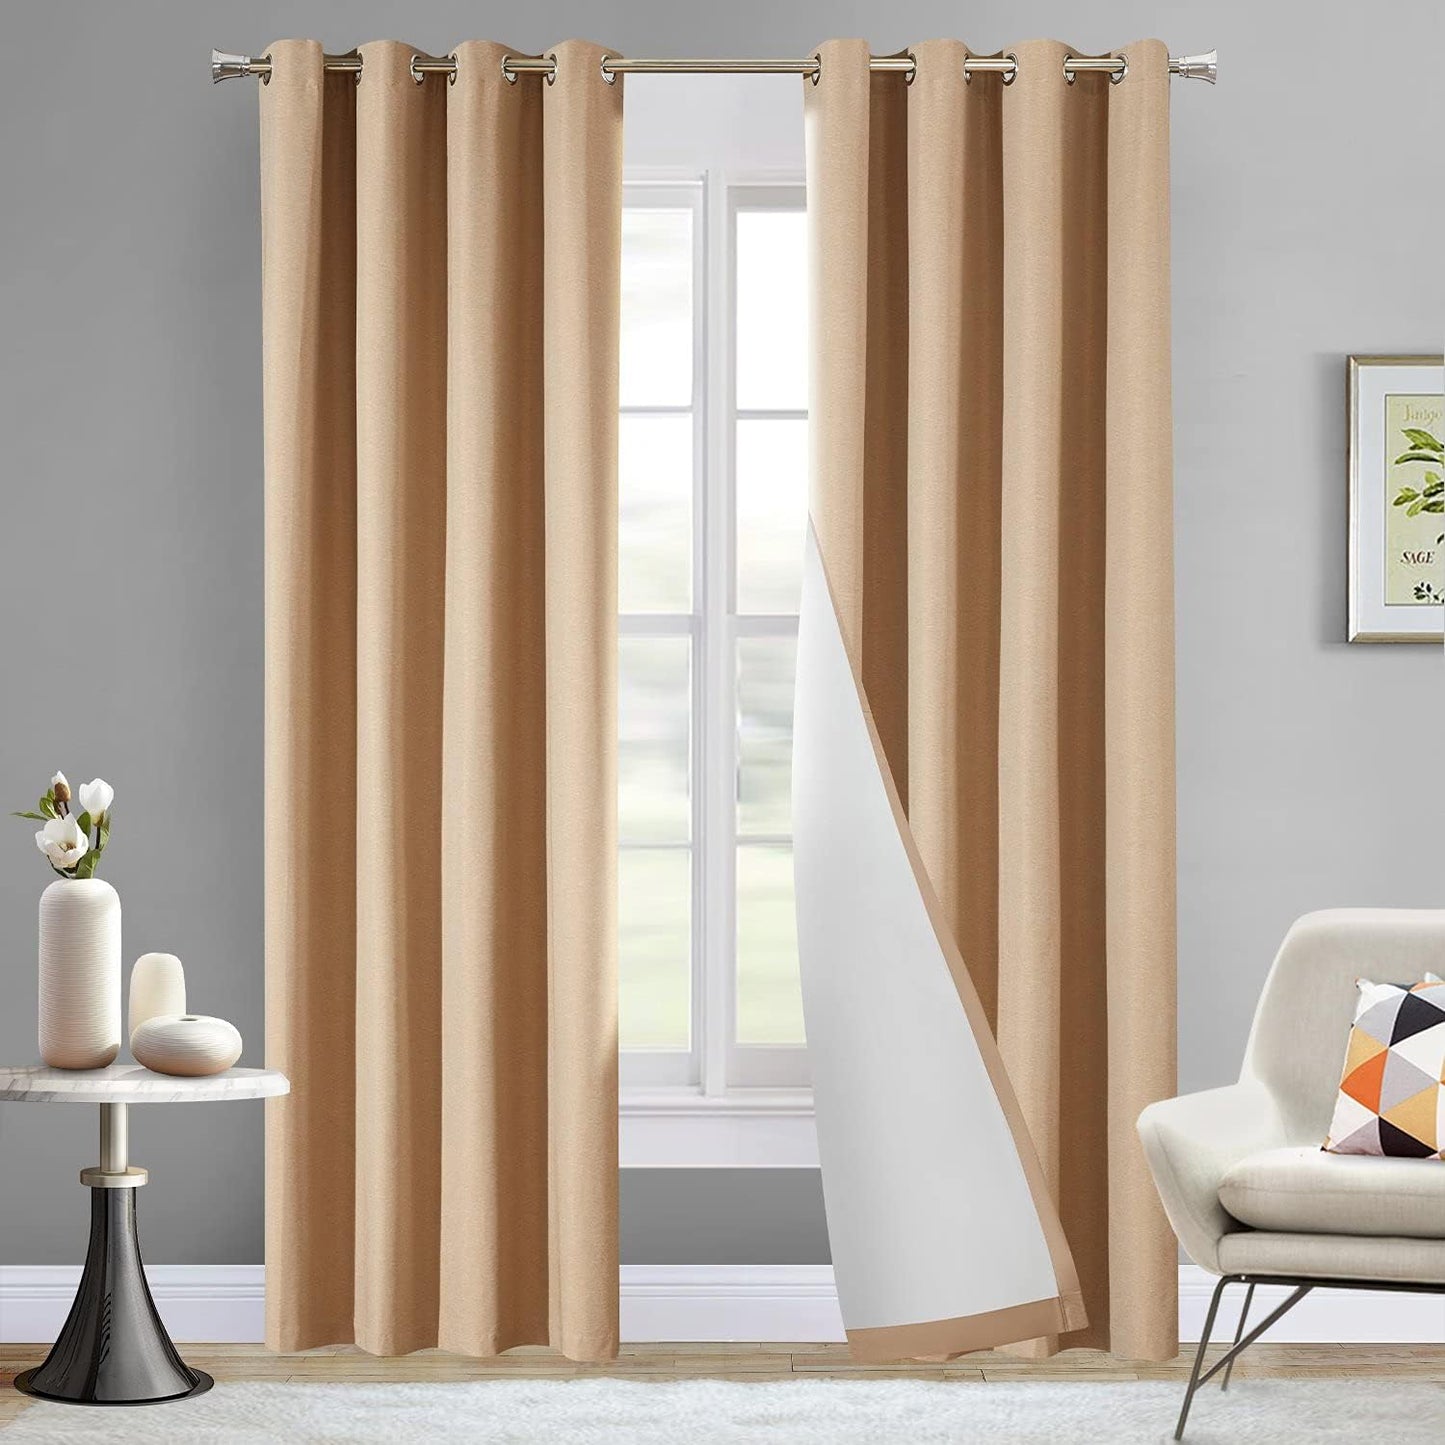 LOYOLADY Dark Grey Blackout Curtains 102 Inches Long 2 Panels Set Thermal Insulated Curtains for Living Room Grommet Noise Reduce Curtains for Bedroom 52" W X 102" L  LoyoLady Home Textiles Flesh 100 Blackout Curtains, Grommet 2 X ( 72" W X 84" L ) 